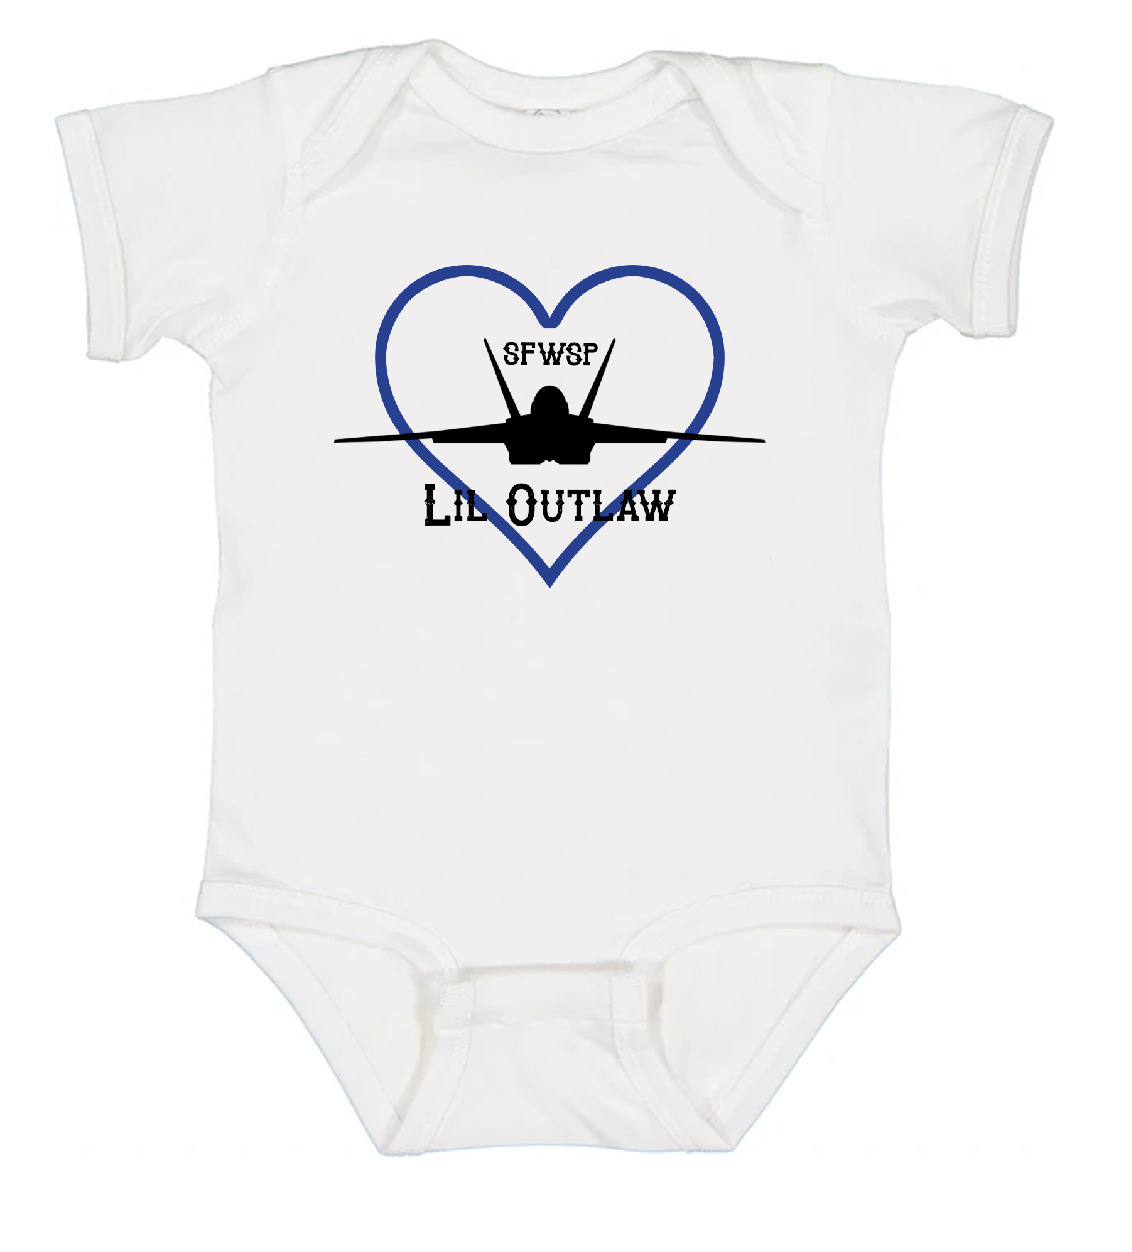 SFWSP Baby Onesies (3 Color Choices)